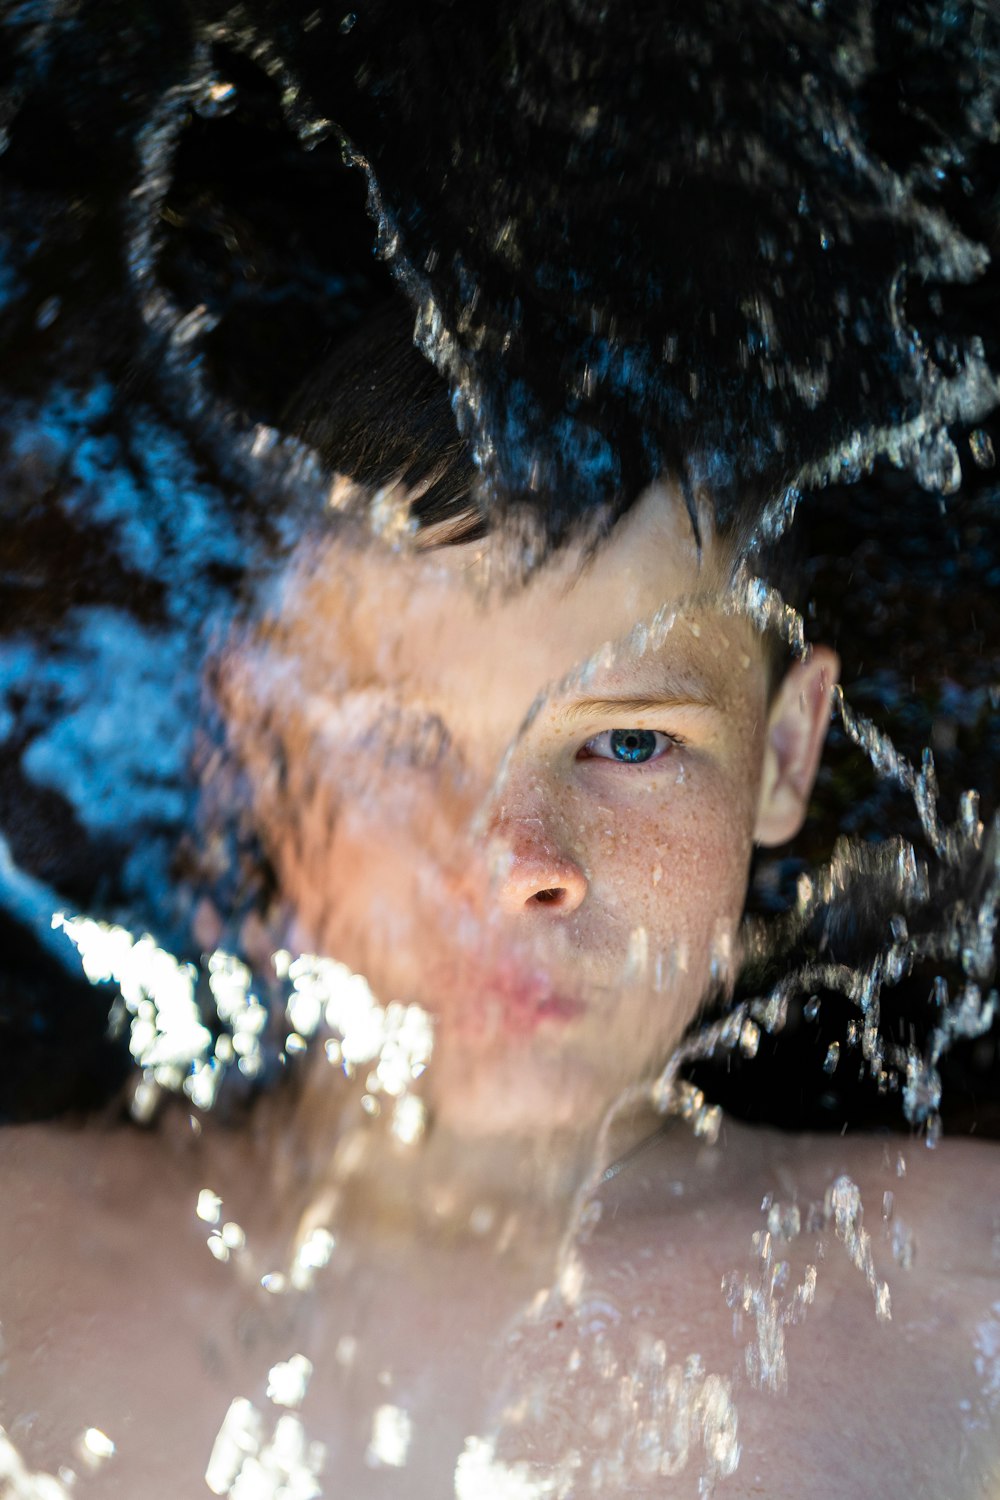 a close up of a person under water